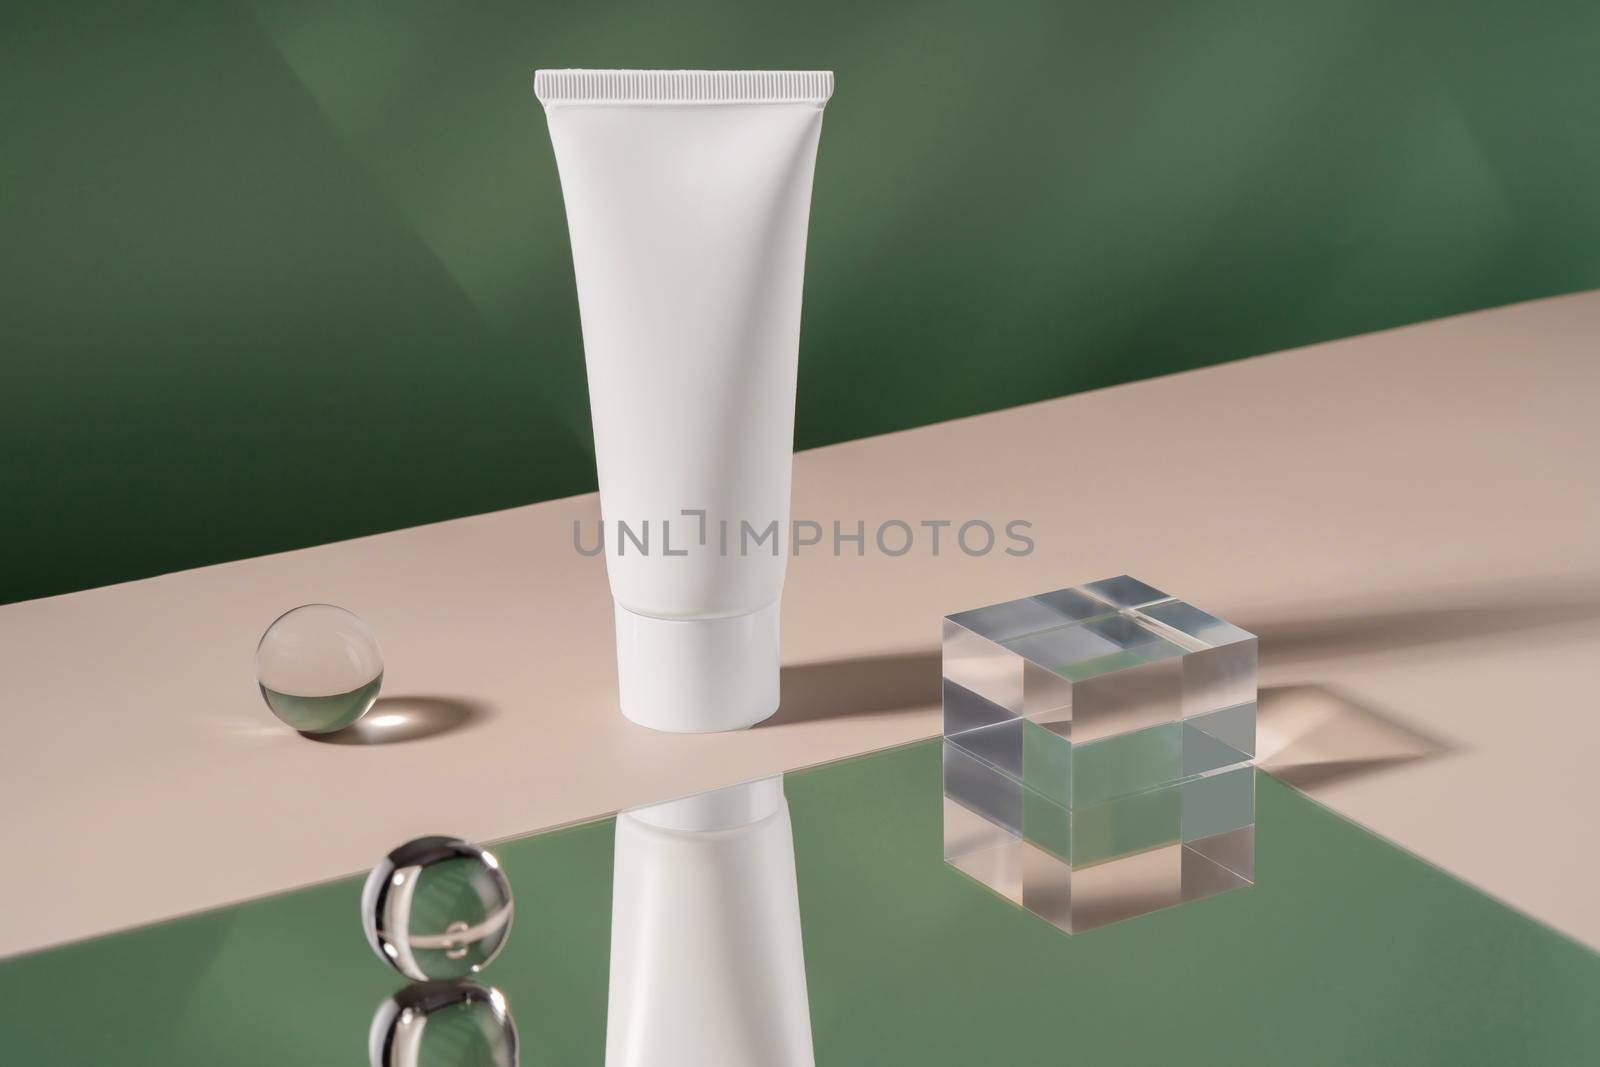 Showcase cosmetics mock up for advertising, cosmetics stand, branding scene with ball and mirror, shadow light. Cosmetic cream mockup showcase product presentation. Green backdrop with stylish props